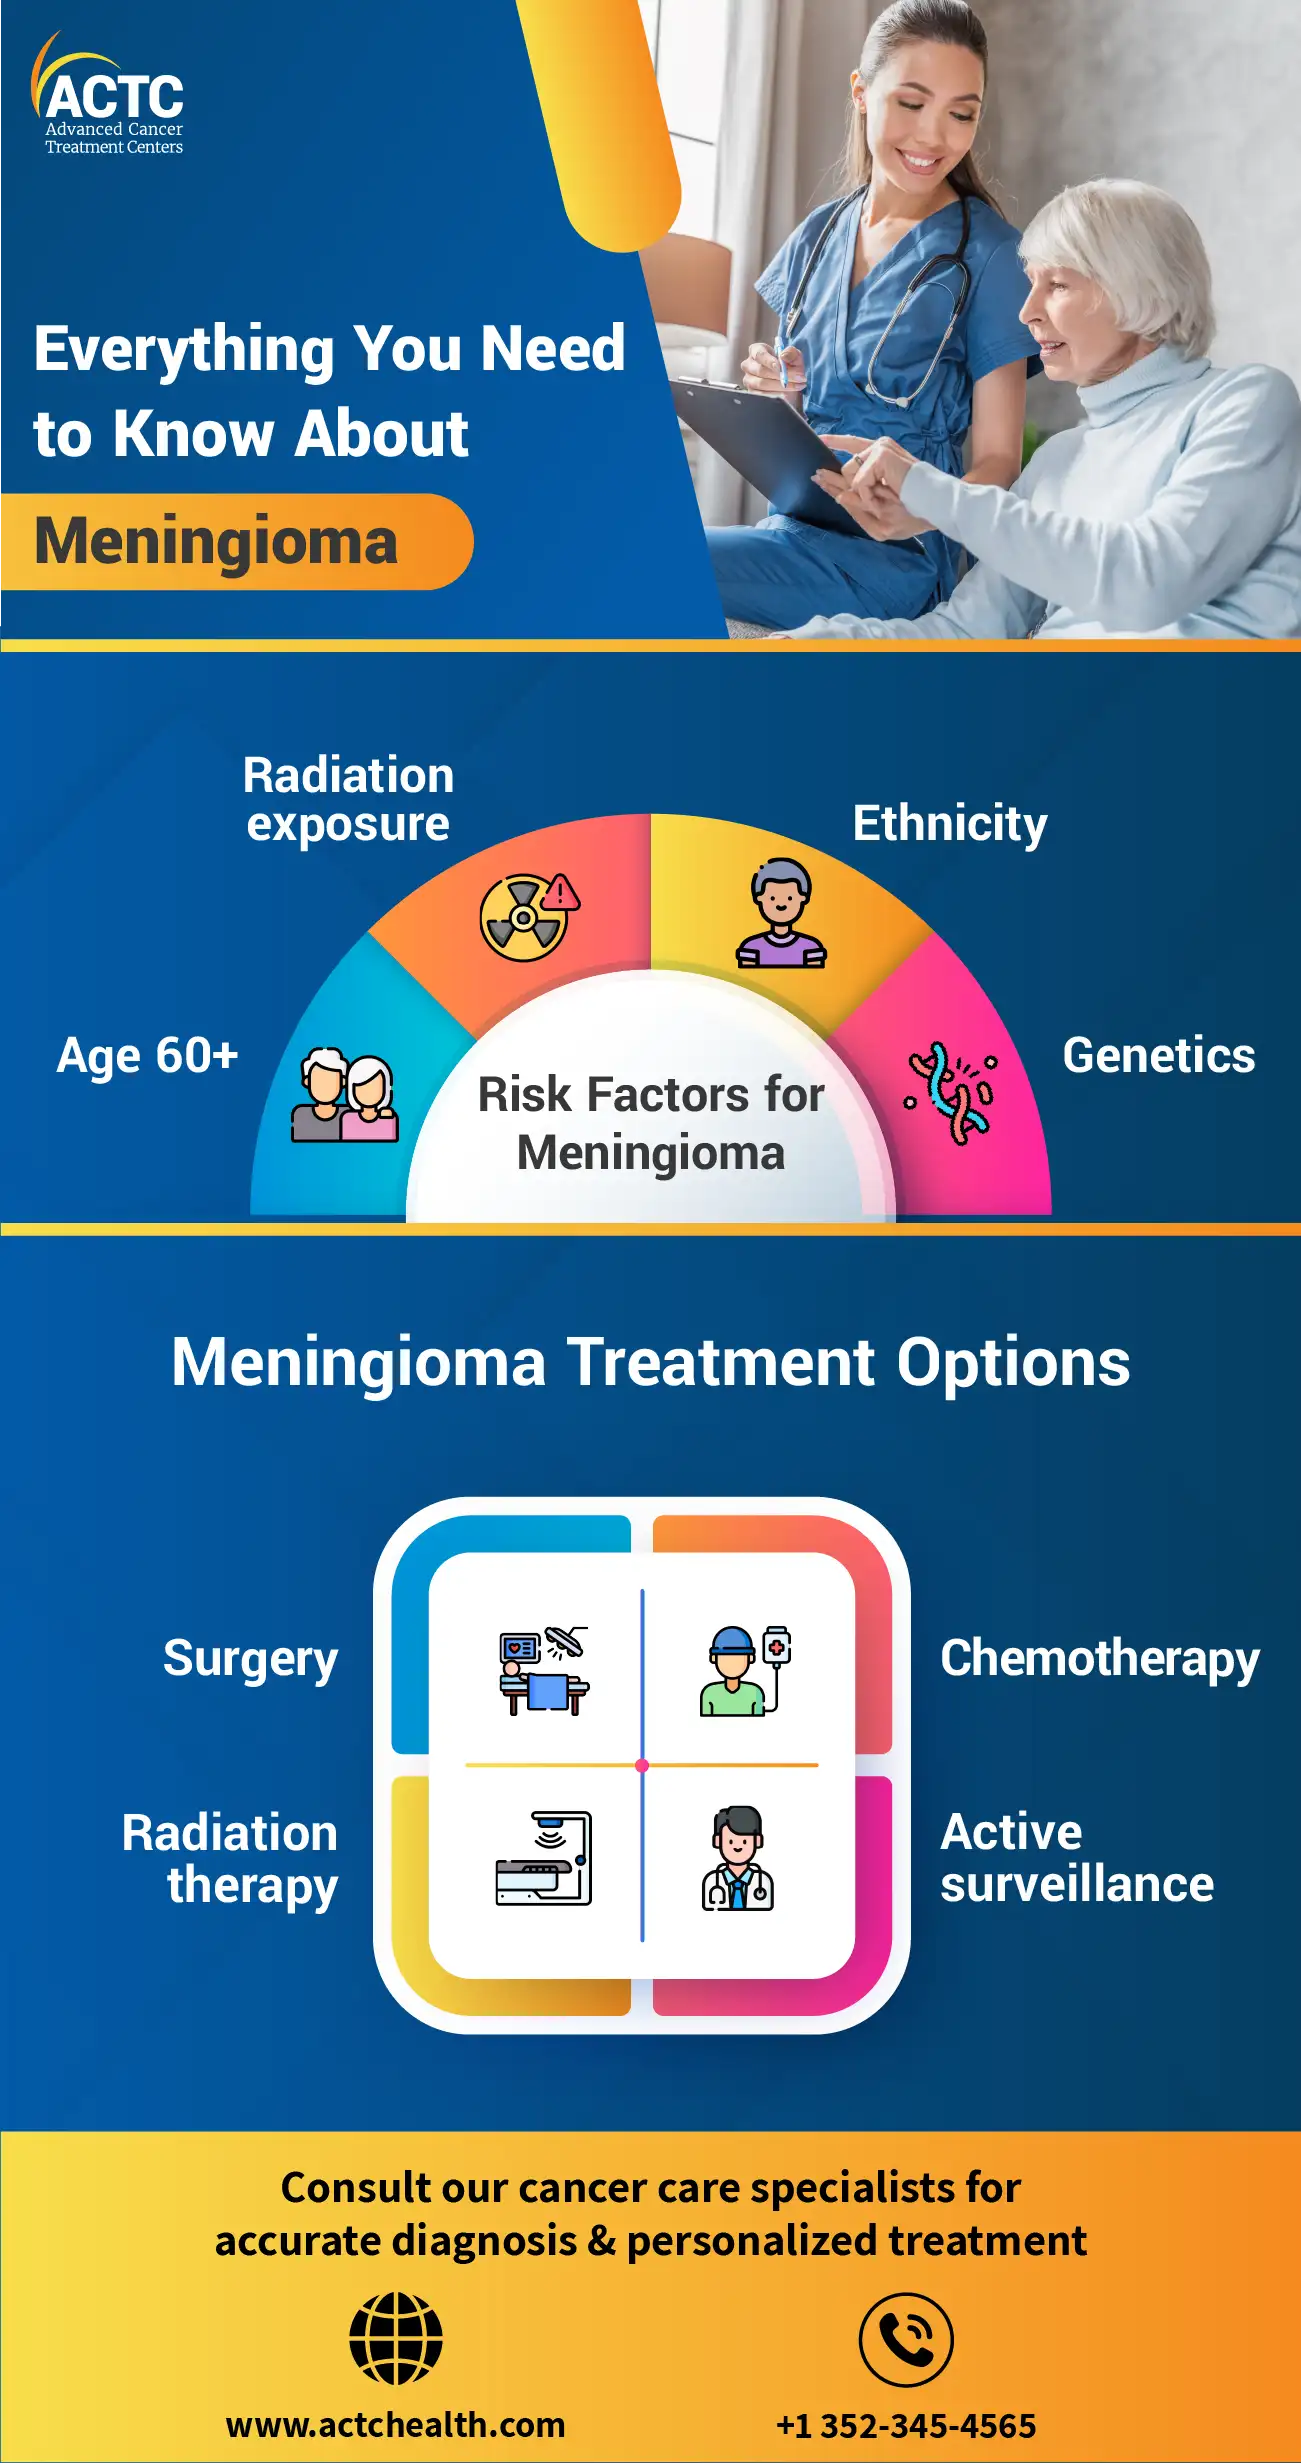 Everything You Need to Know About Meningioma